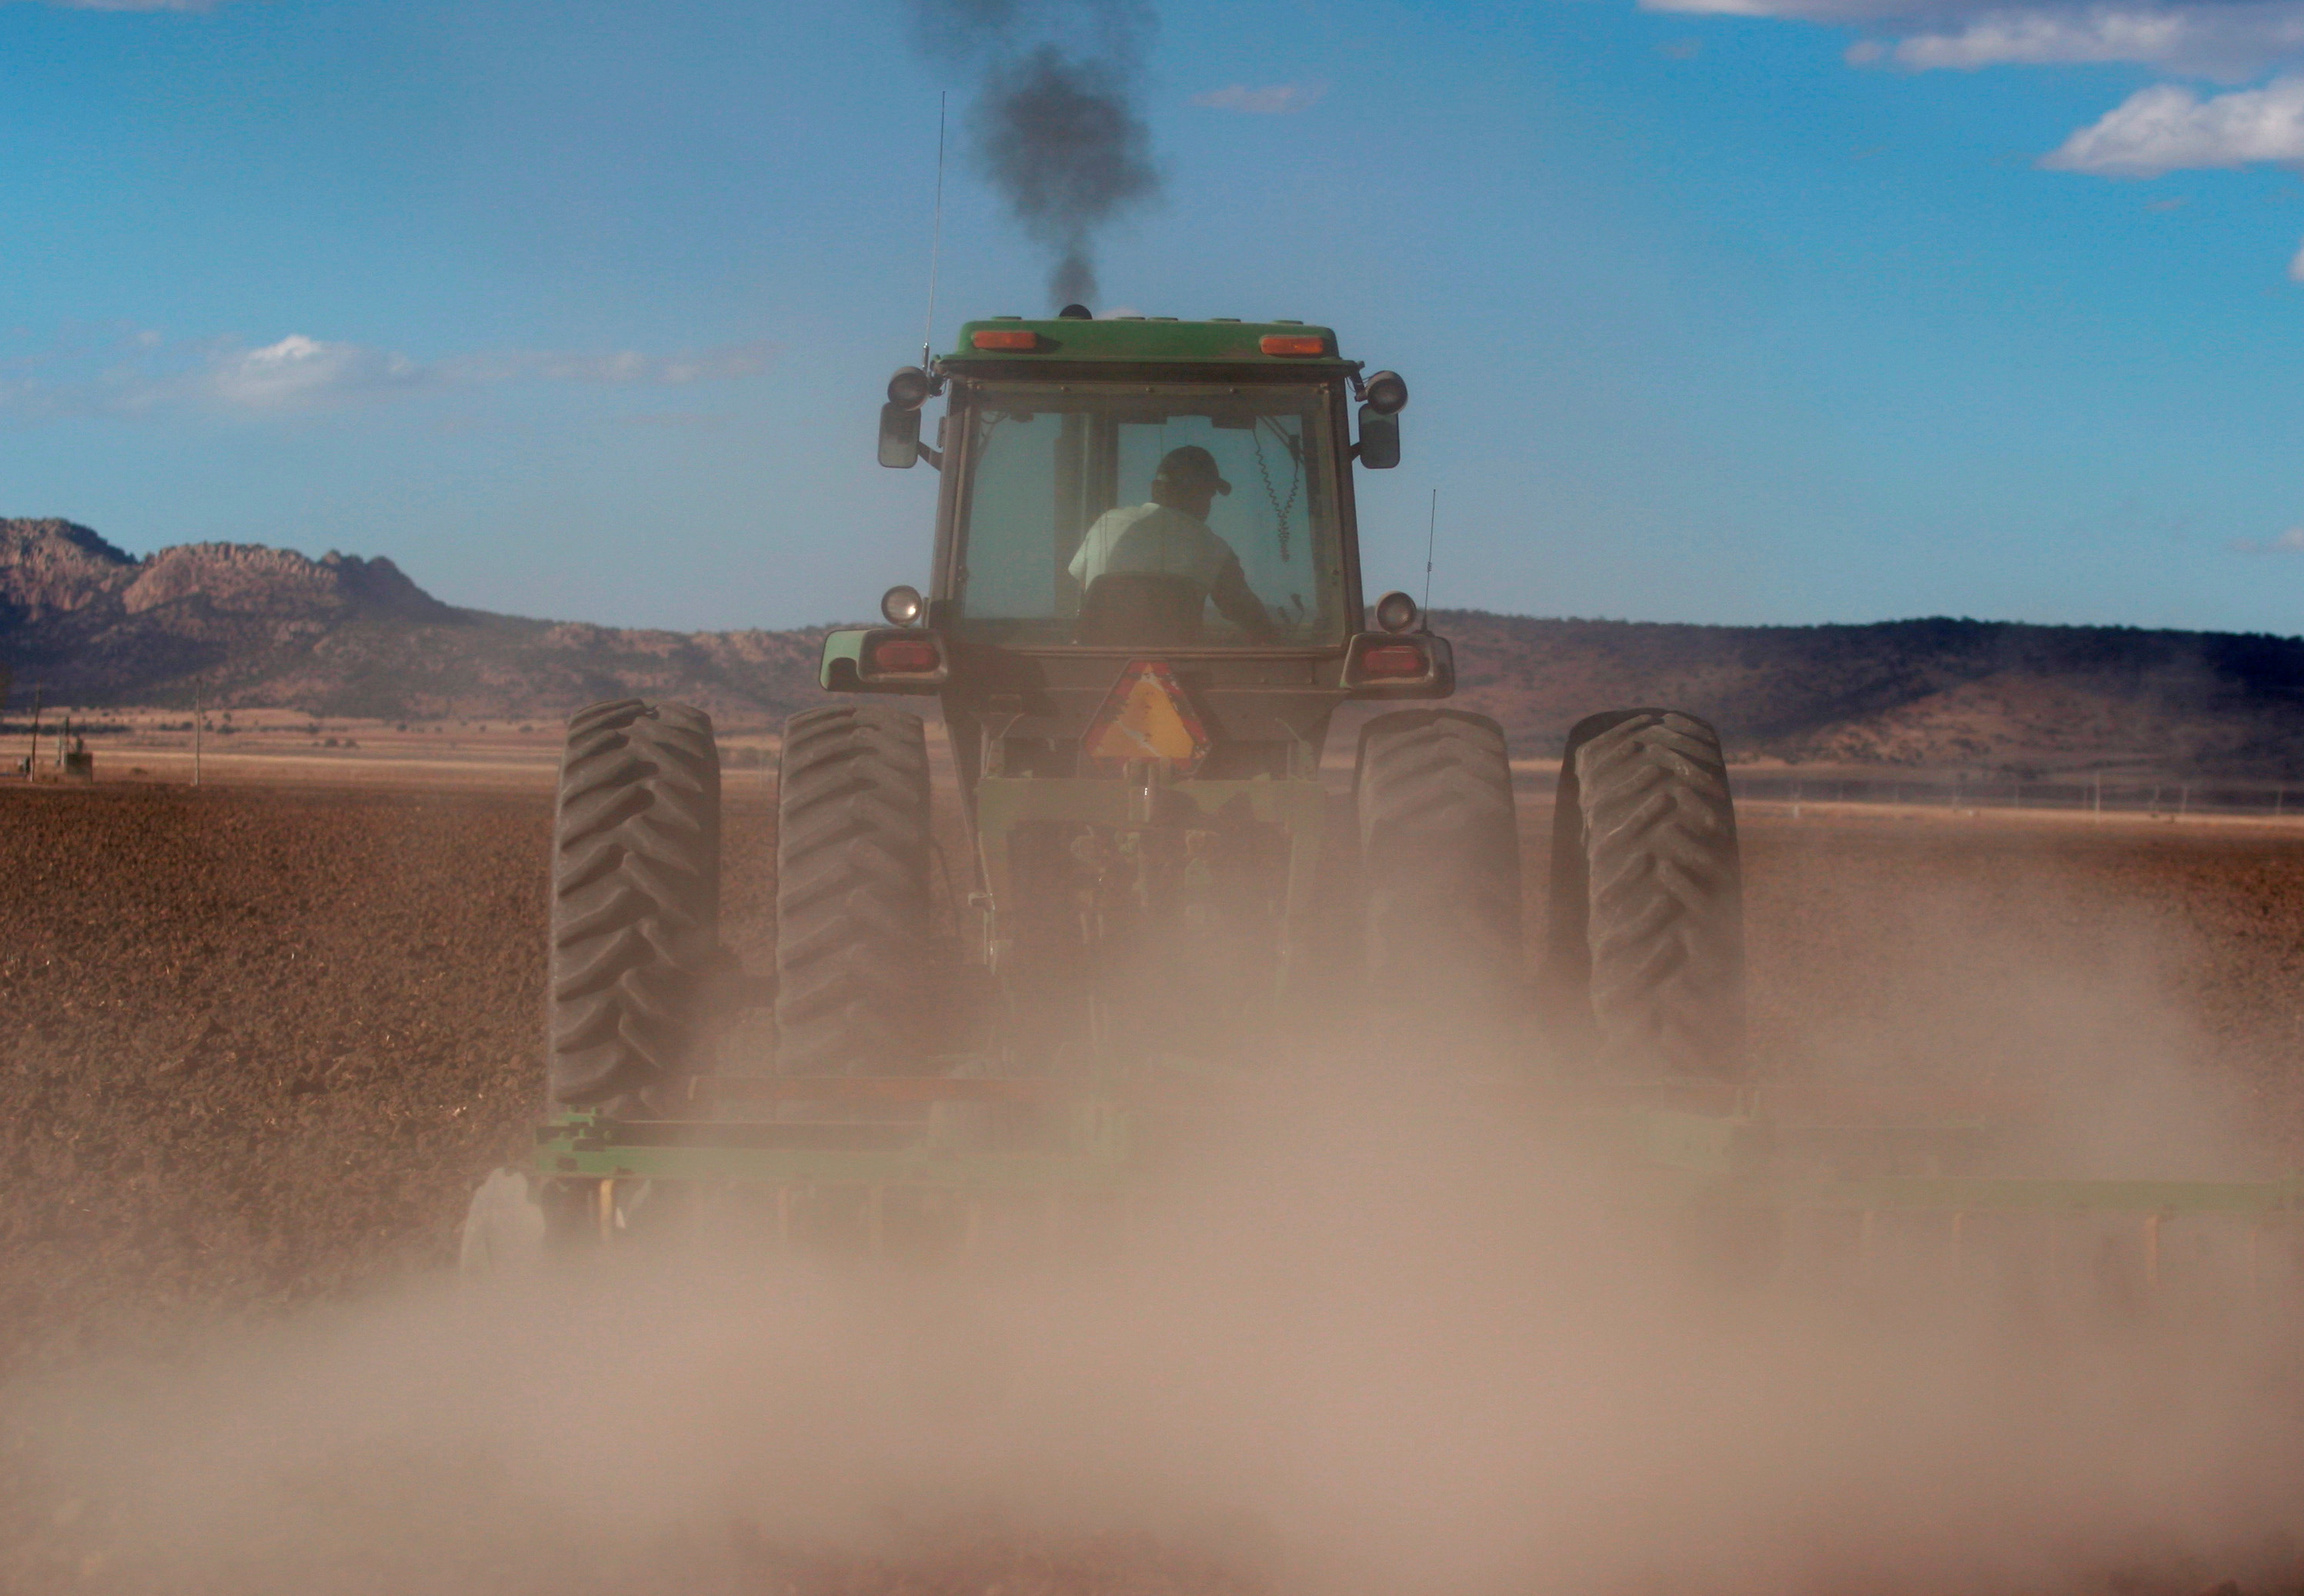 A tractor ploughs a hectare of land at Ejido Benito Juarez in the northern Mexican state of Chihuahua